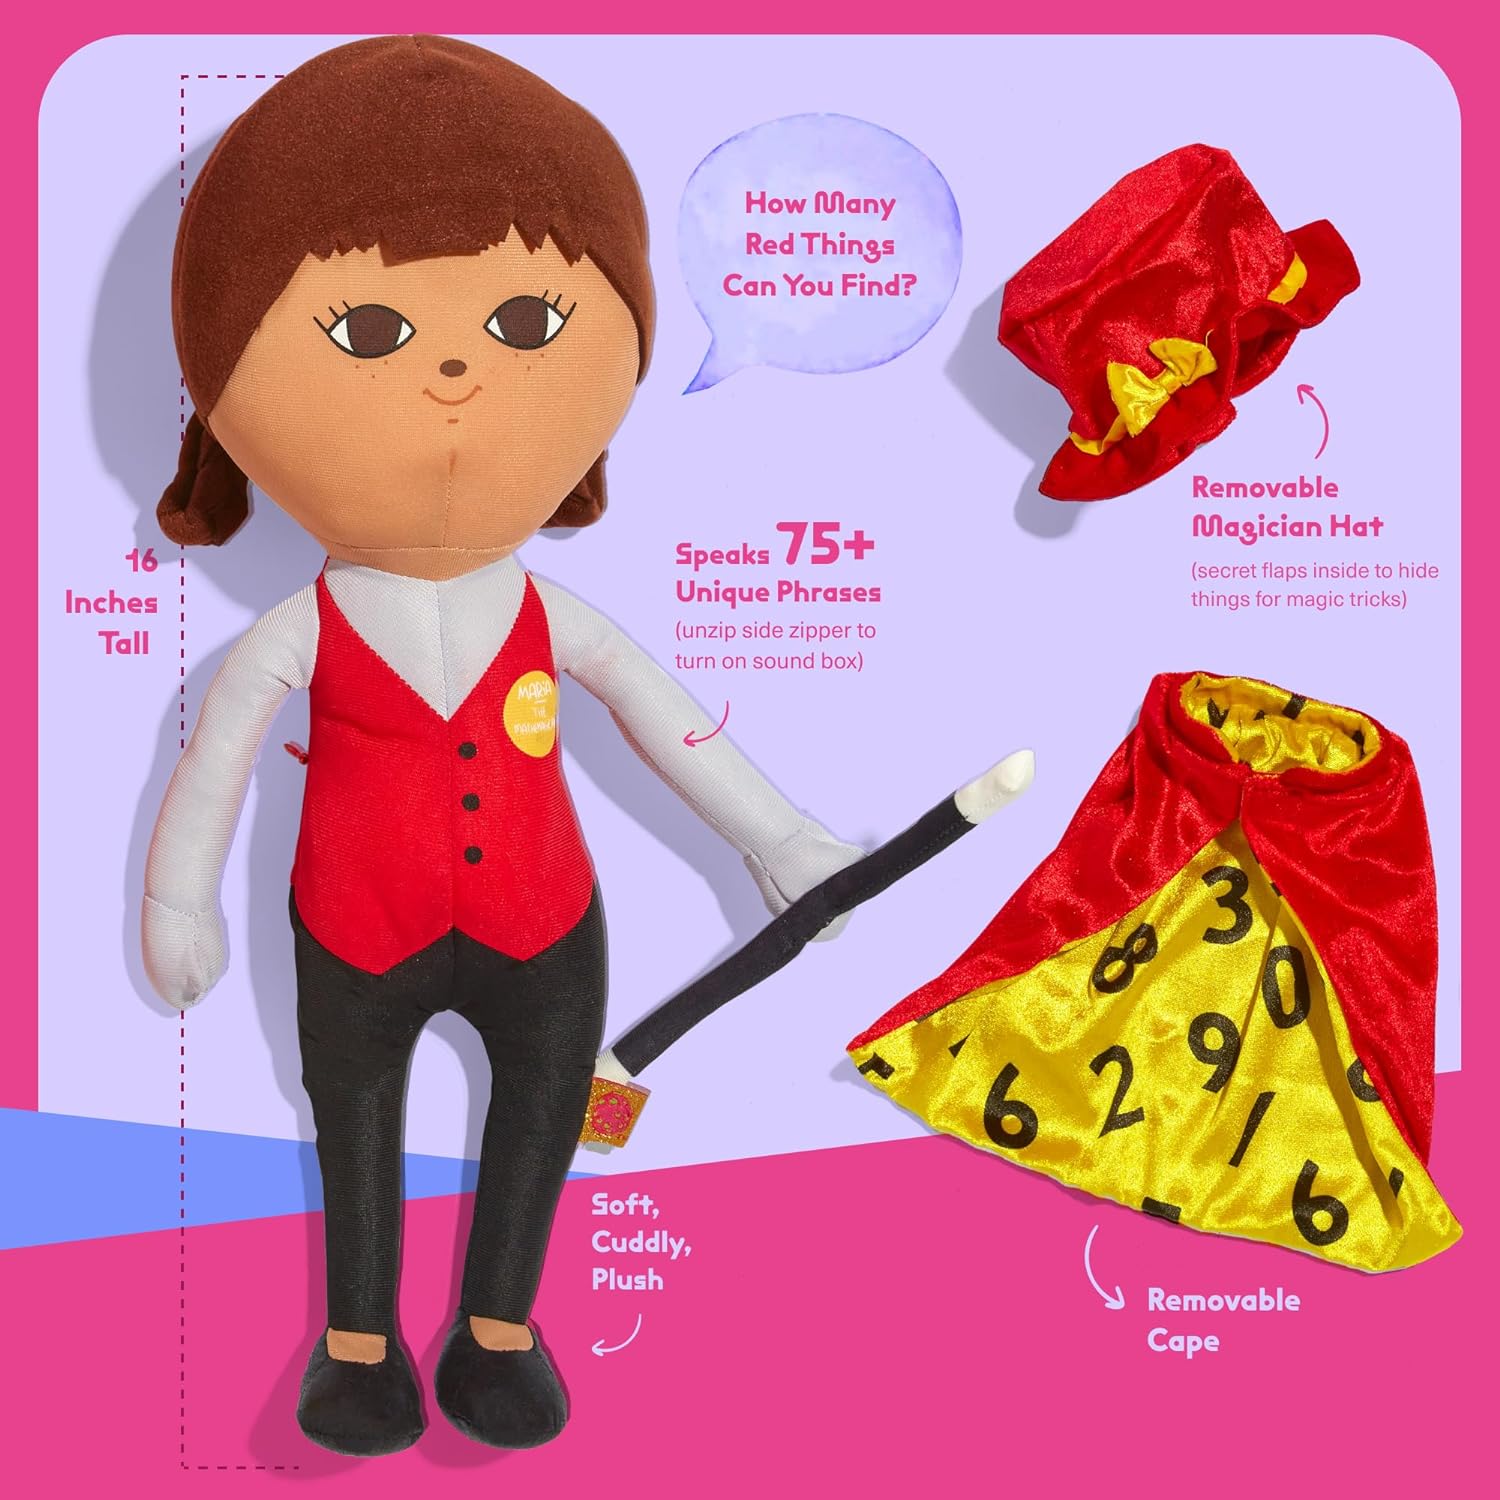 Surprise Powerz María The Mathemagician Plush Doll Girls Toys, 16" Latina Doll, Educational Play Gift, STEM Learning - 2-5 Year Old Girl Toy, Toddler & Preschool Pretend Dolls